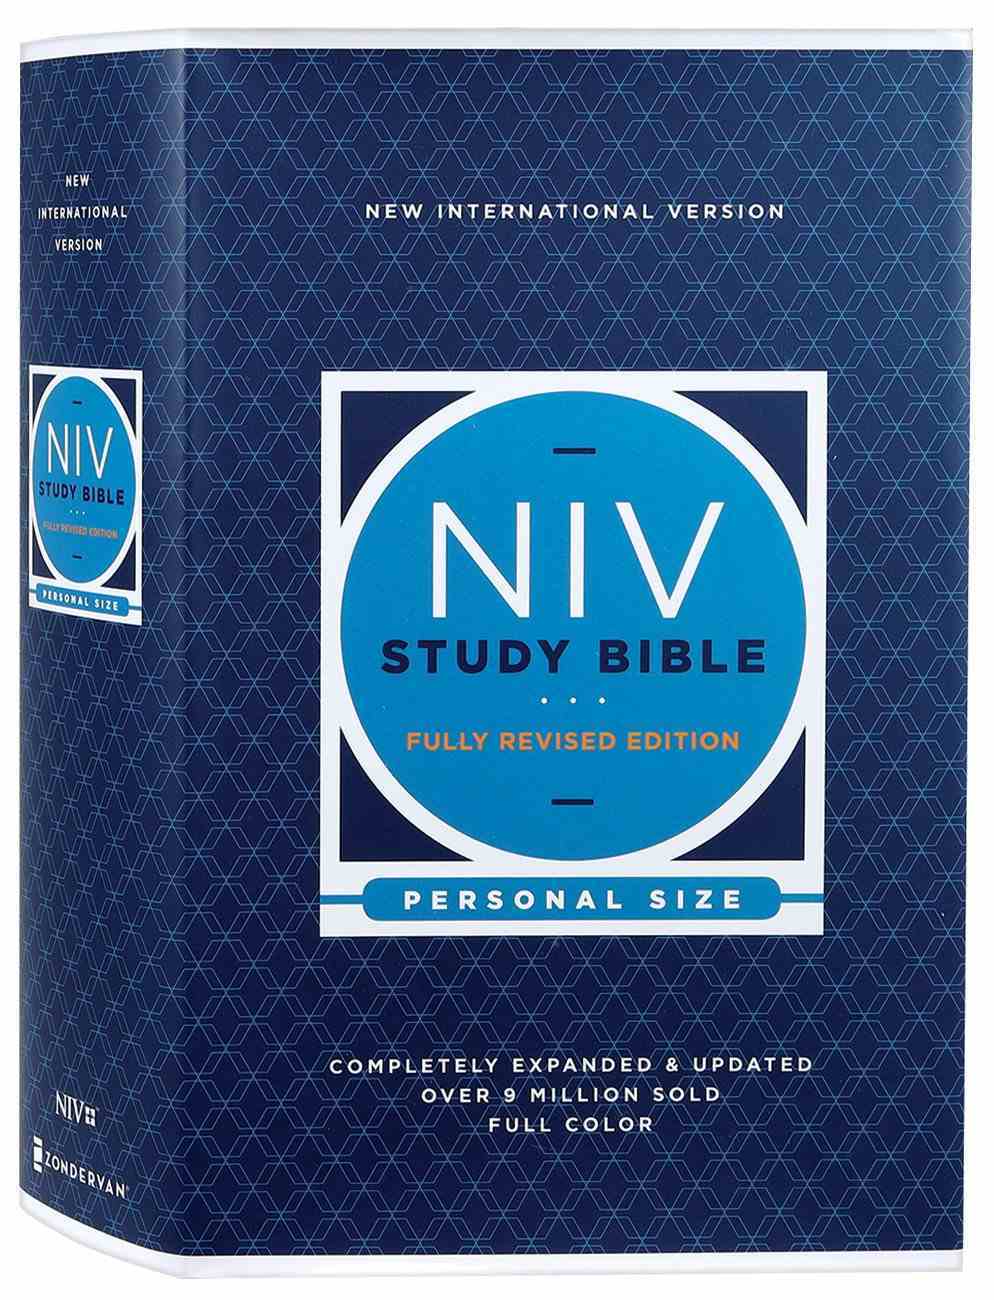 NIV Study Bible Personal Size (Red Letter Edition) Fully Revised Edition (2020) Hardback